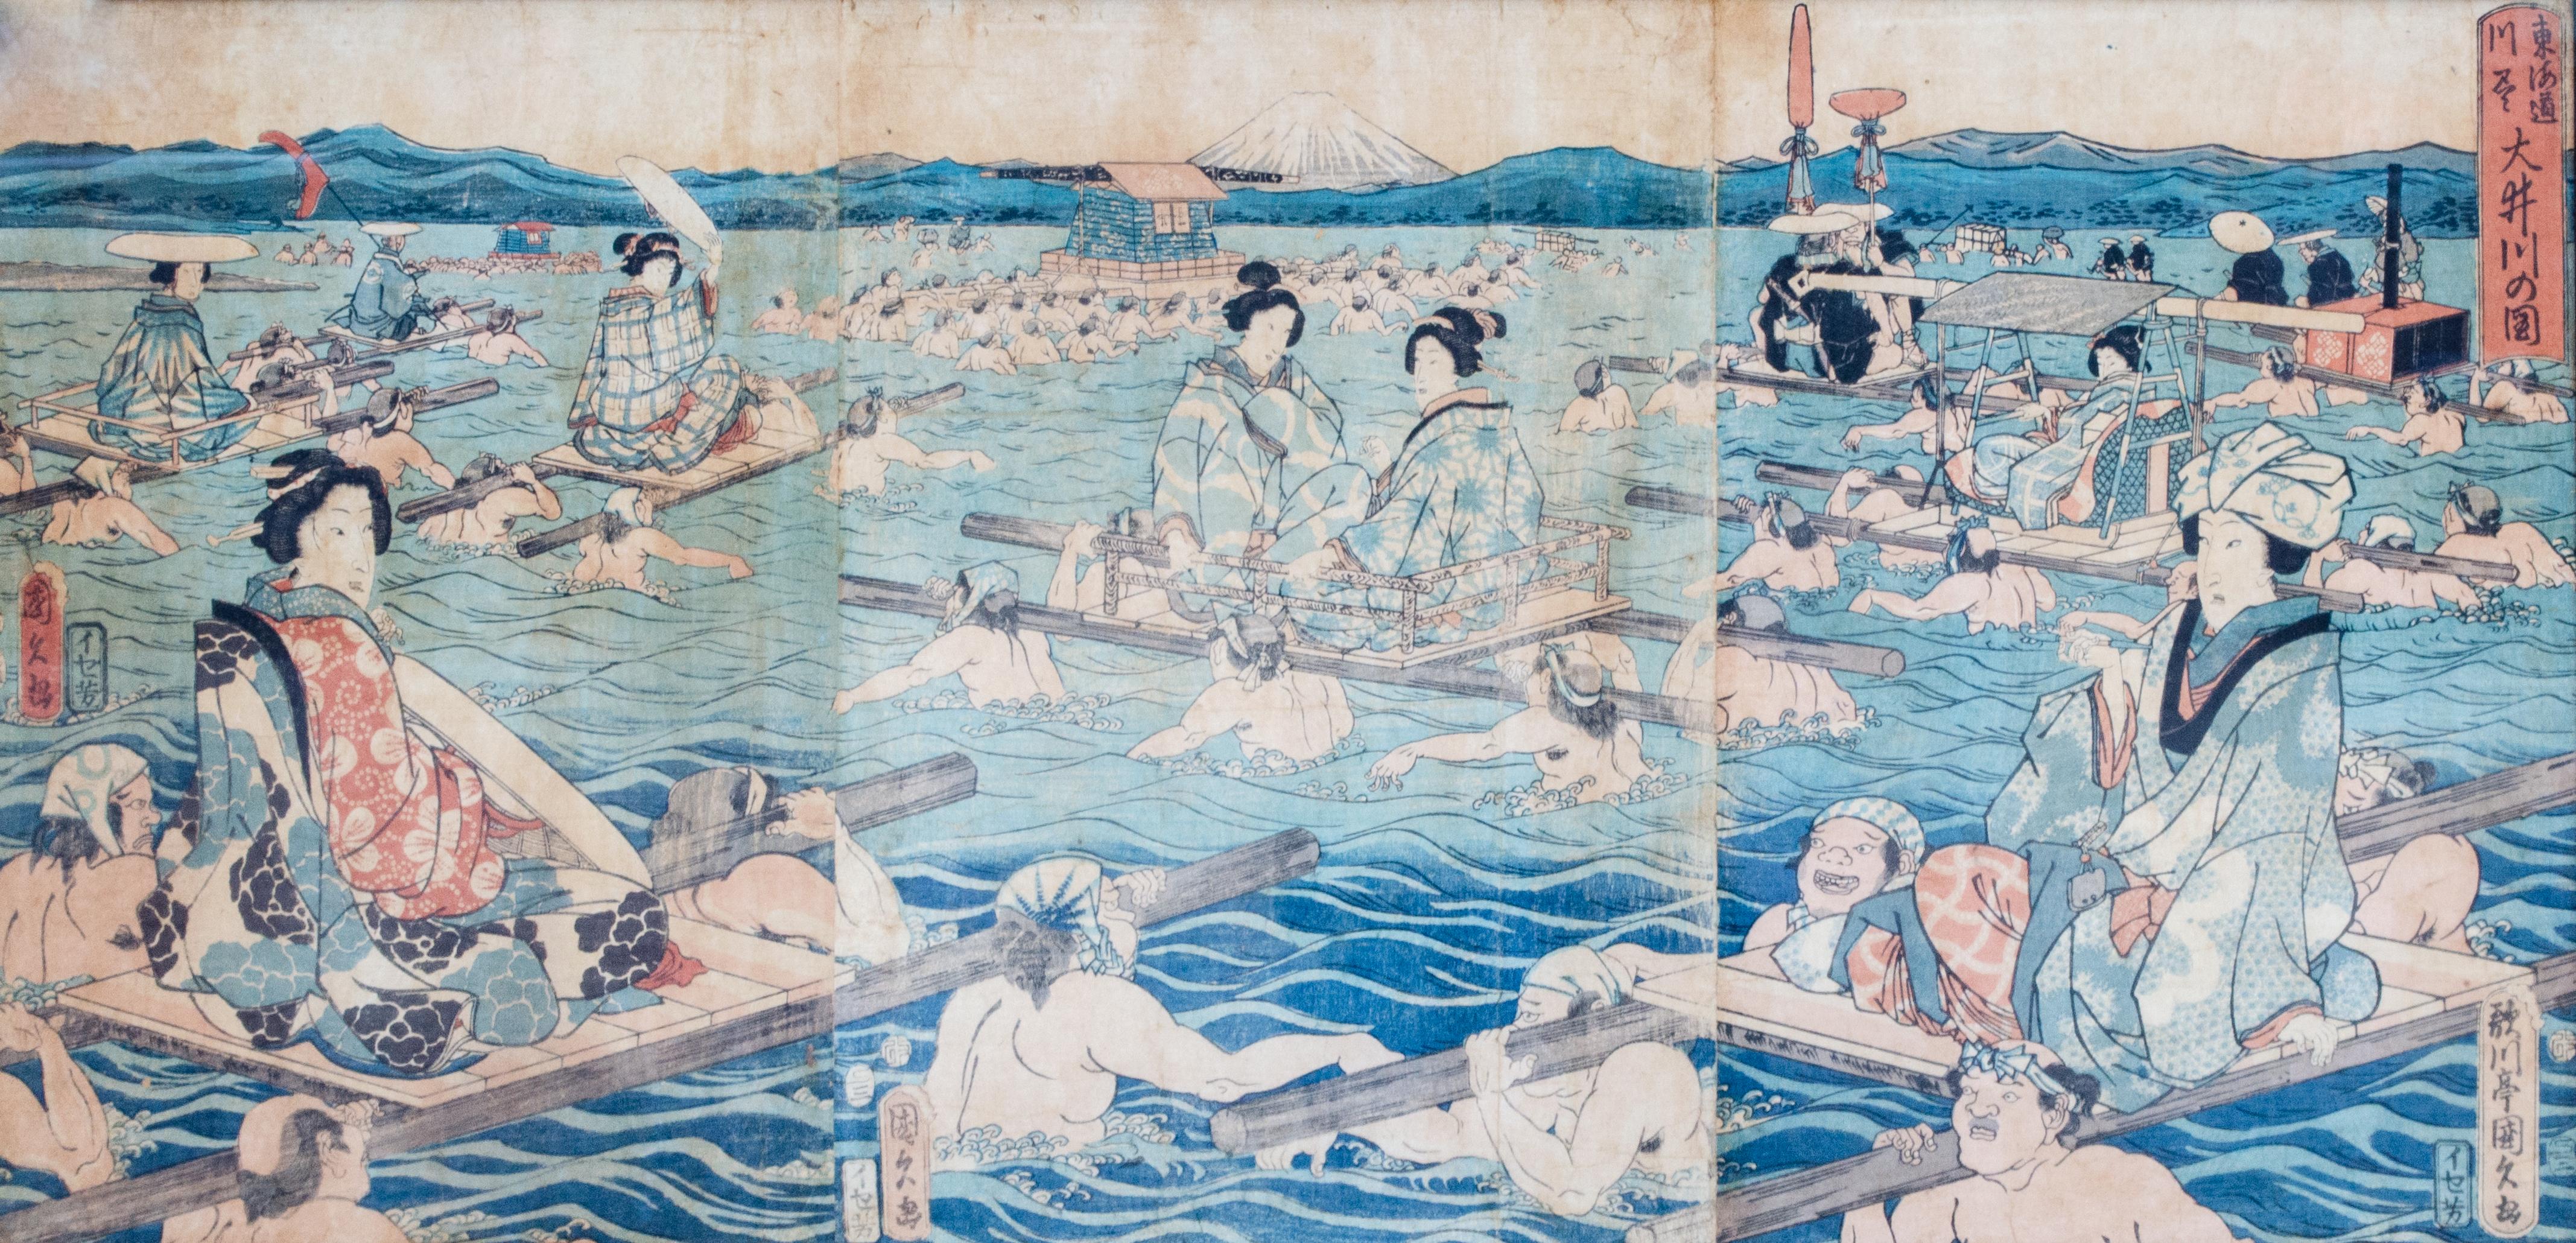 Unknown Interior Print - Rare Scene of Nobility on Palanquins Over Water, Ukiyo-e Style Woodcut